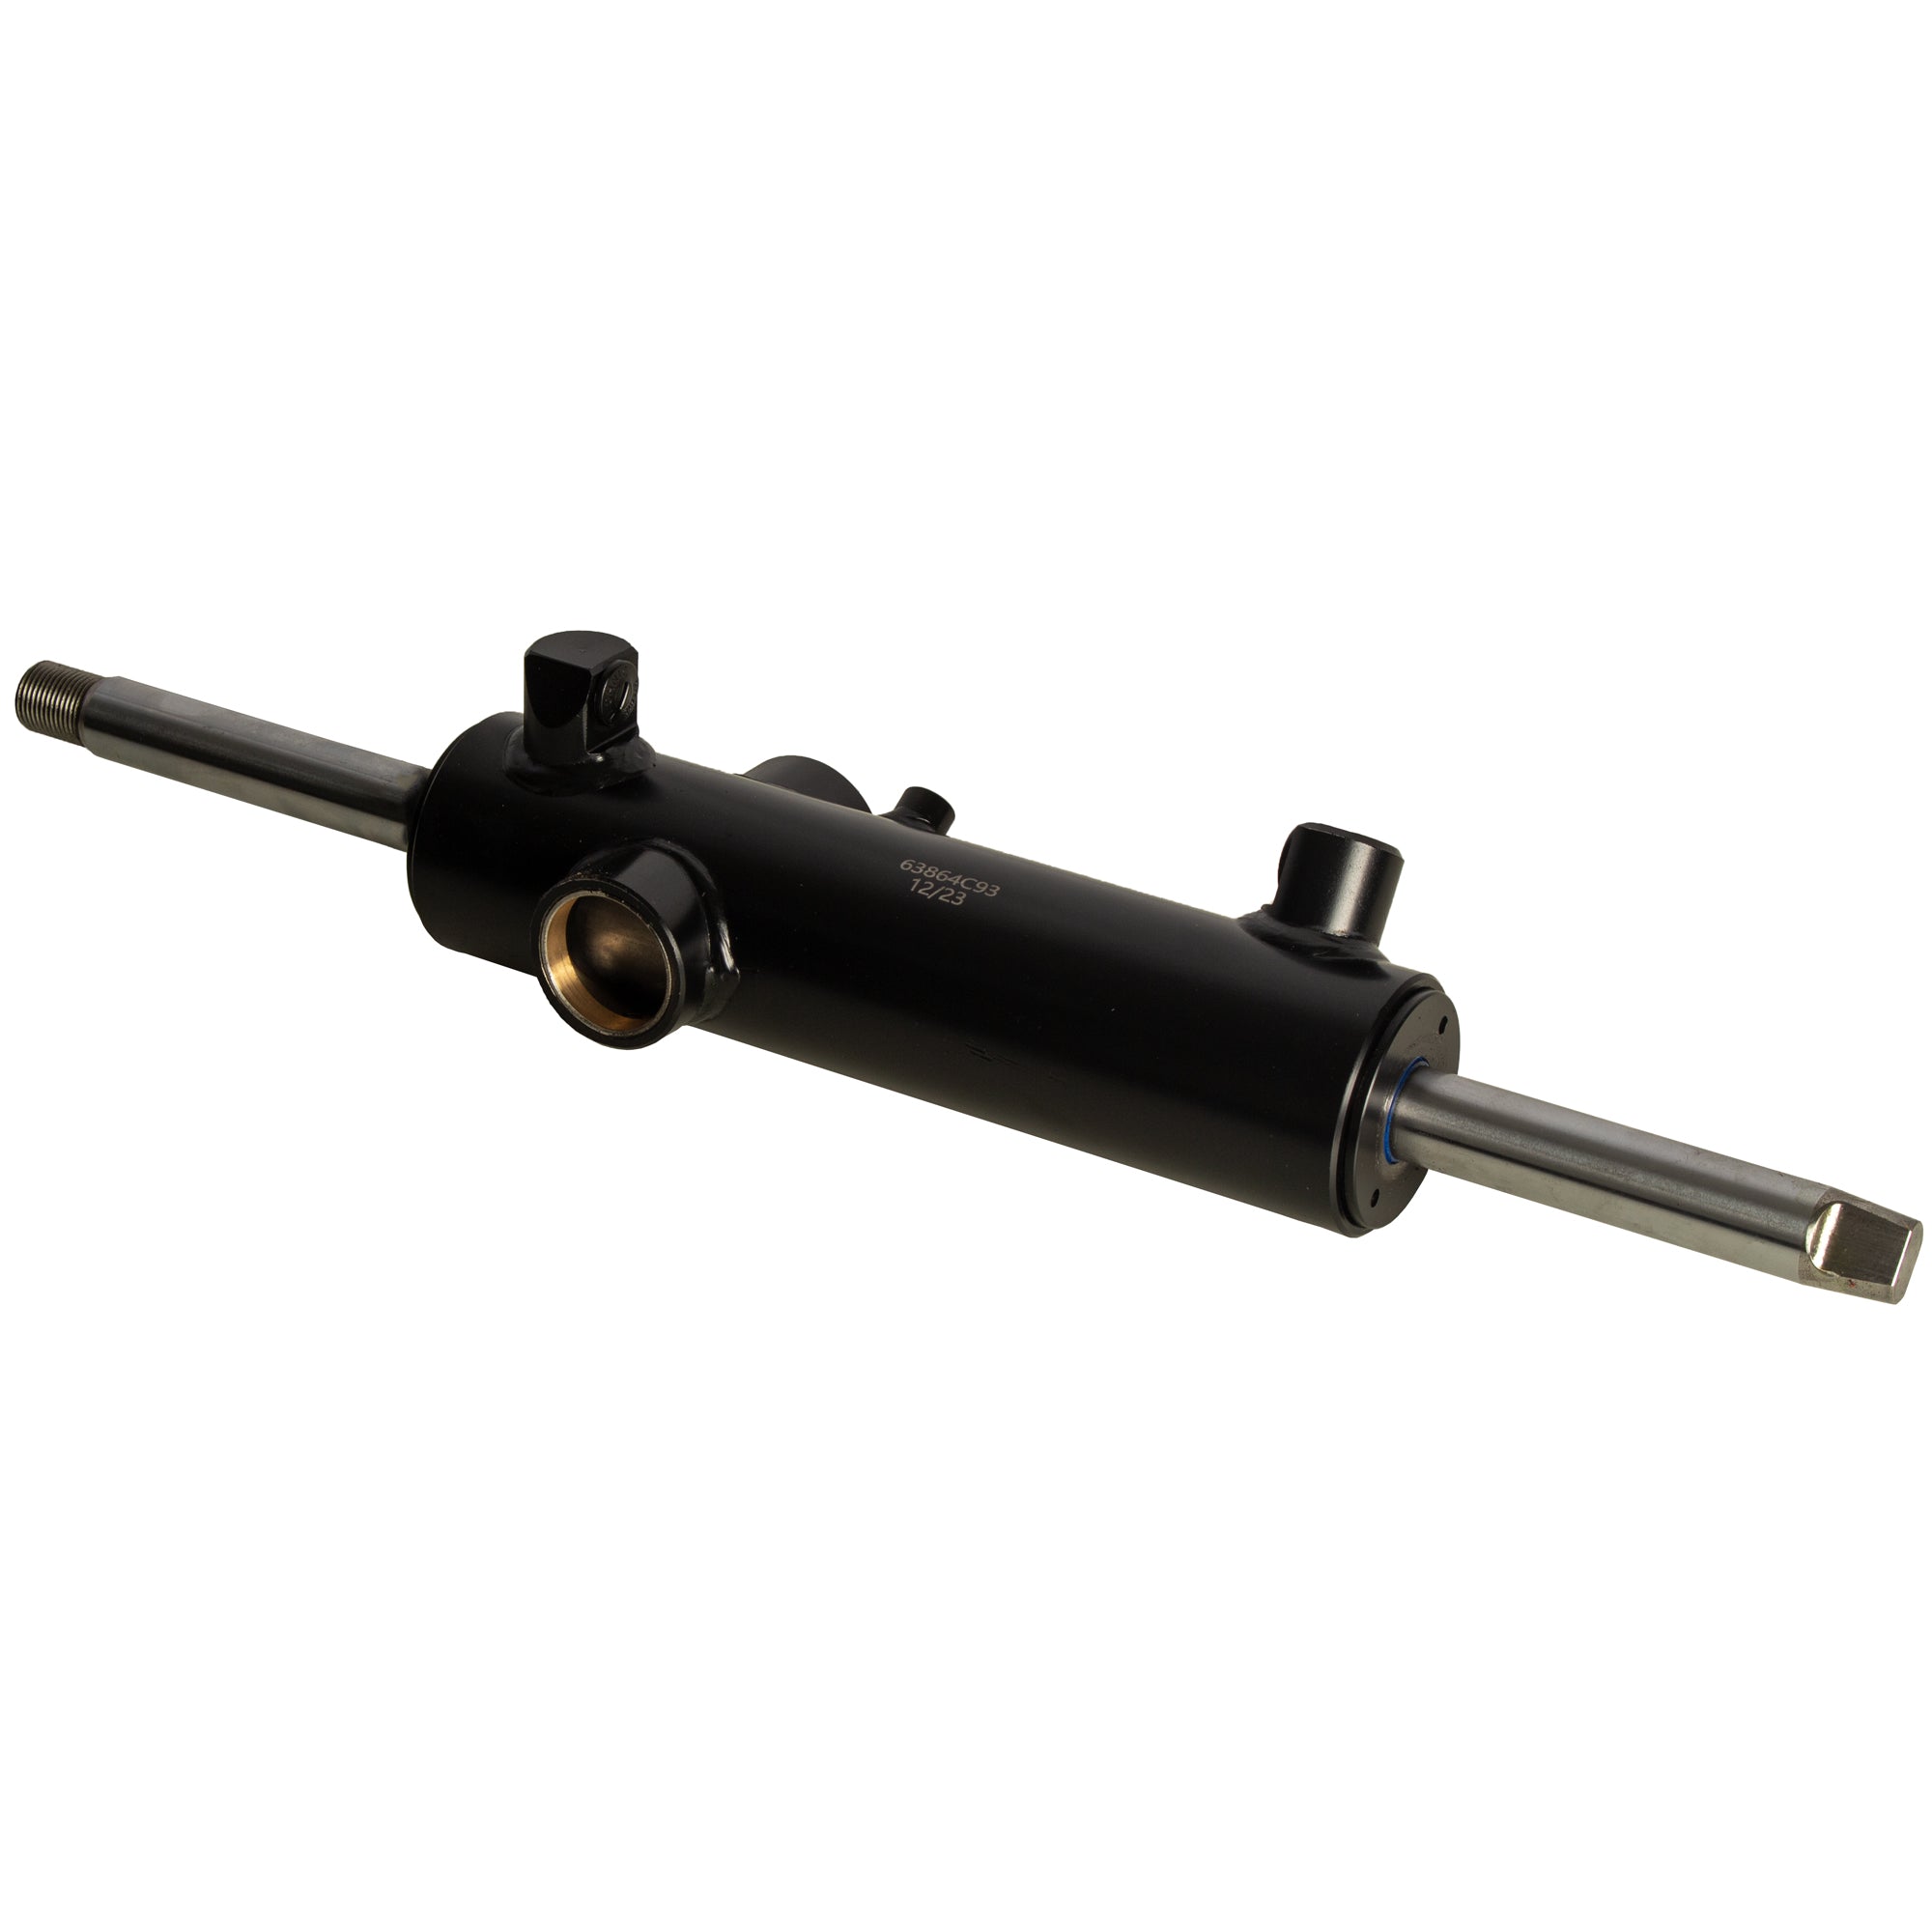 Power Steering Cylinder Replacement for INTERNATIONAL 766 1086 3288 63864C93